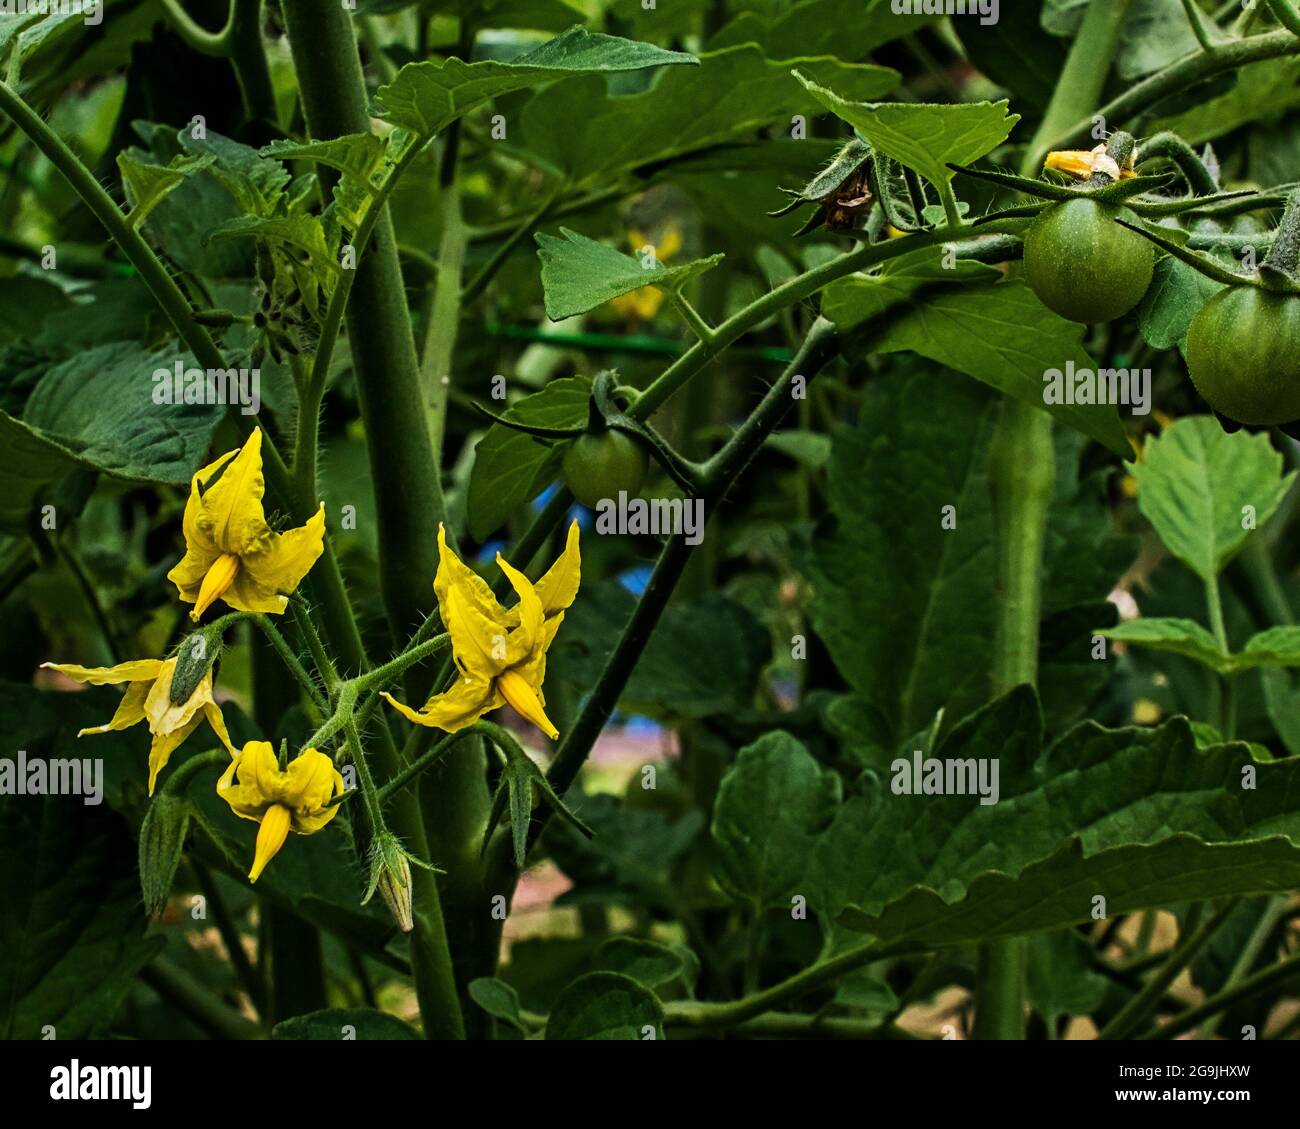 Tomato plant with green tomatos and blossoms Stock Photo